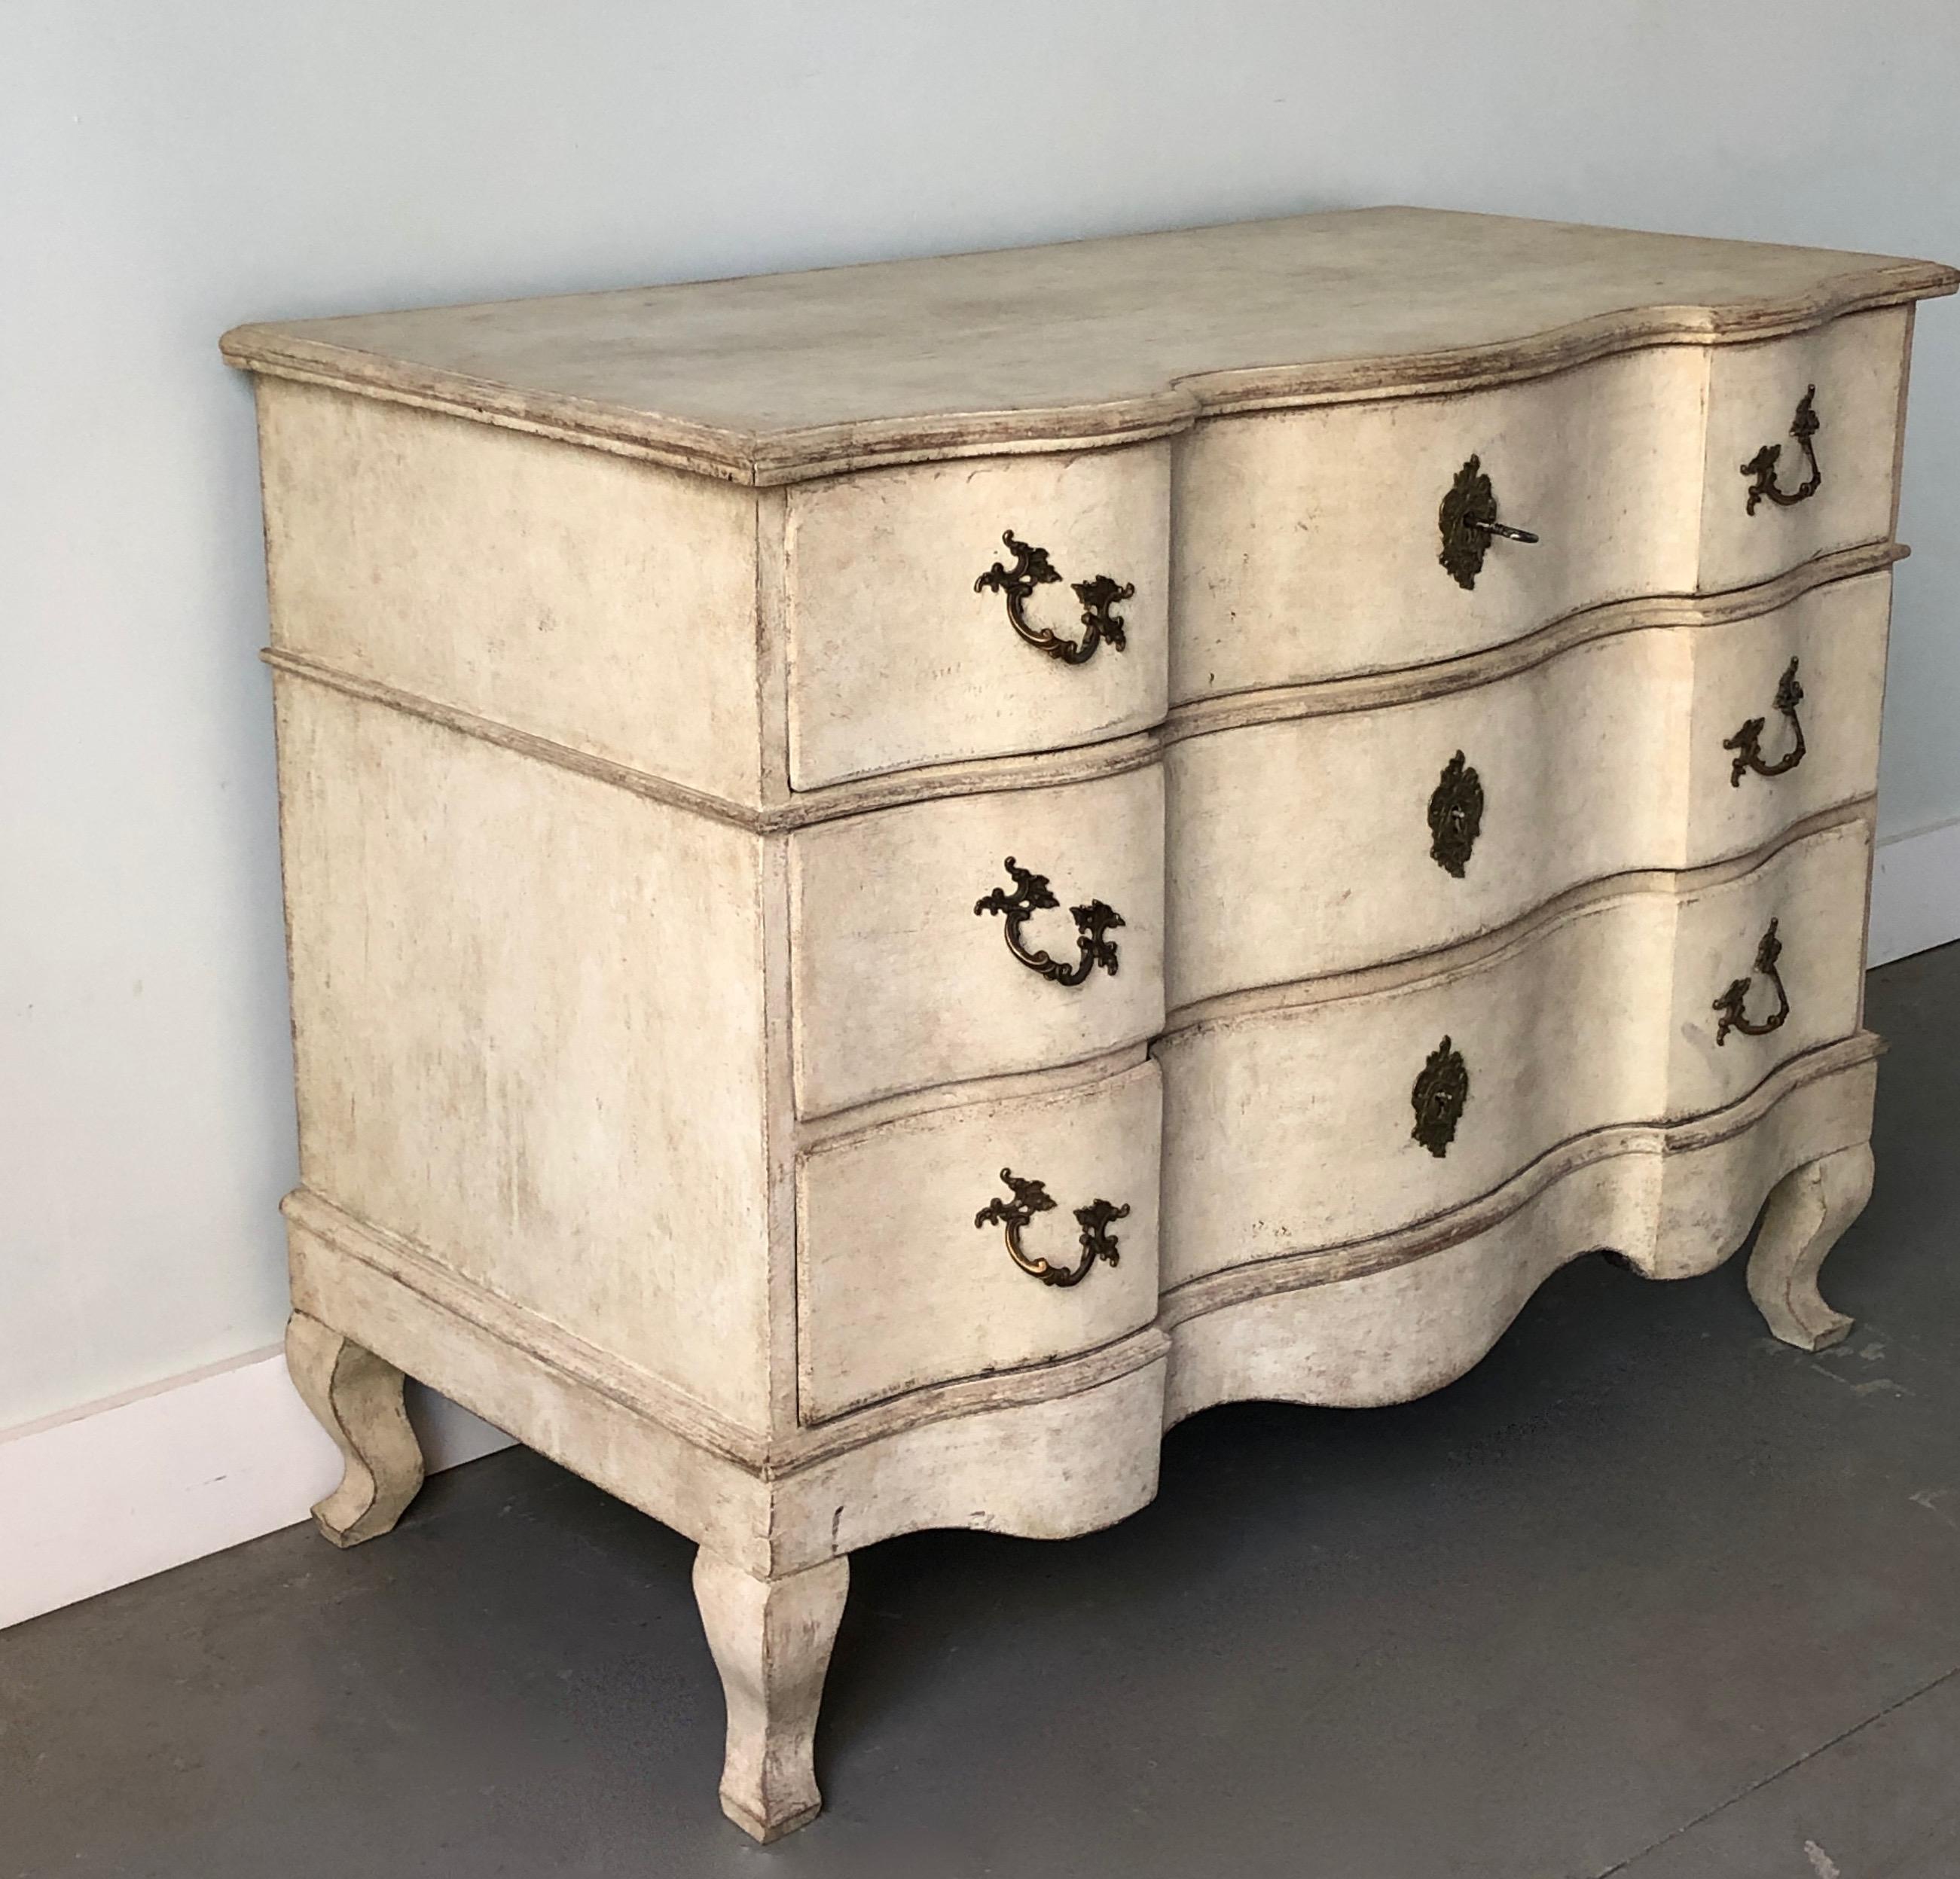 A rare and beautifully carved 18th century Rocco period chest with wonderfully curvaceous serpentine drawers original bronze handles and shabed skirt on short cabriole legs.
Wonderful statement piece! 
Stockholm, Sweden, circa 1720.

 